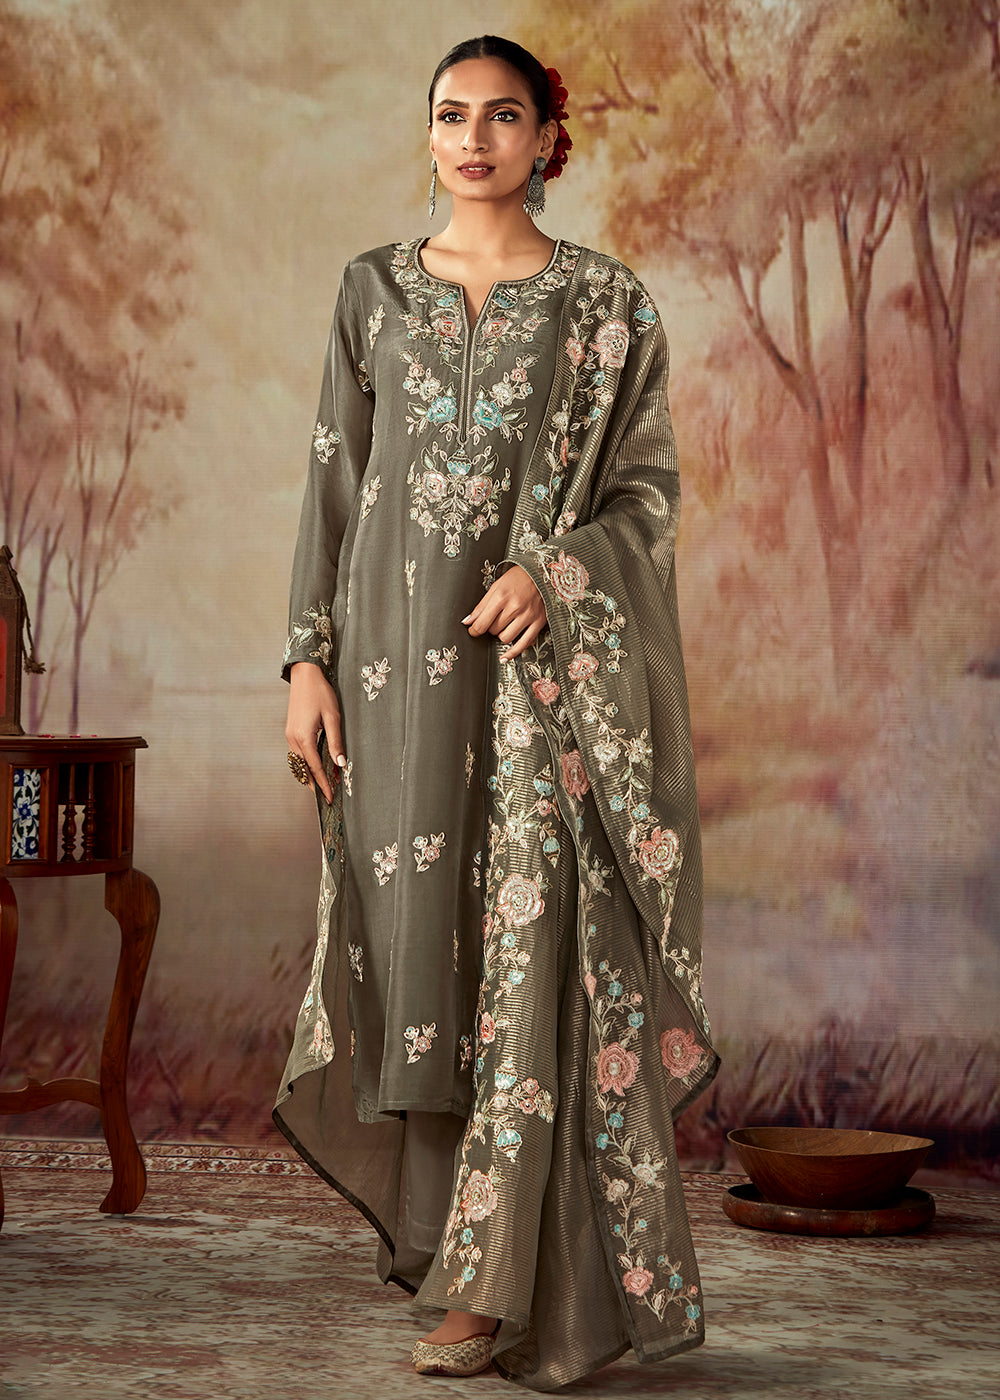 Buy Now Dusty Grey Russian Silk Embroidered Pant Style Salwar Kurta Online in USA, UK, Canada, Germany, Australia & Worldwide at Empress Clothing.